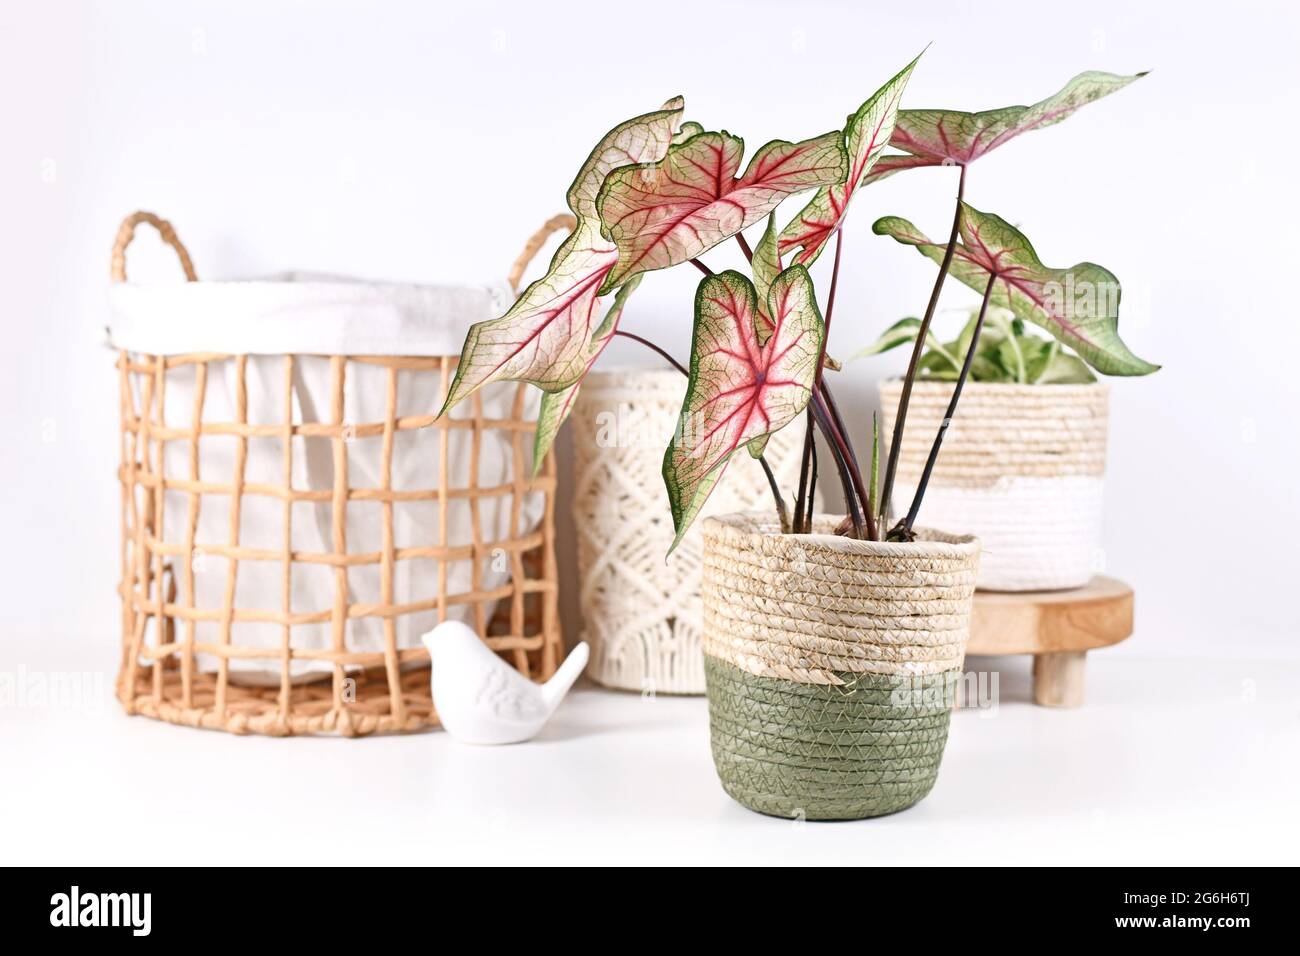 Exotic 'Caladium White Queen' plant with pink leaves in front of home decor objects like basket Stock Photo